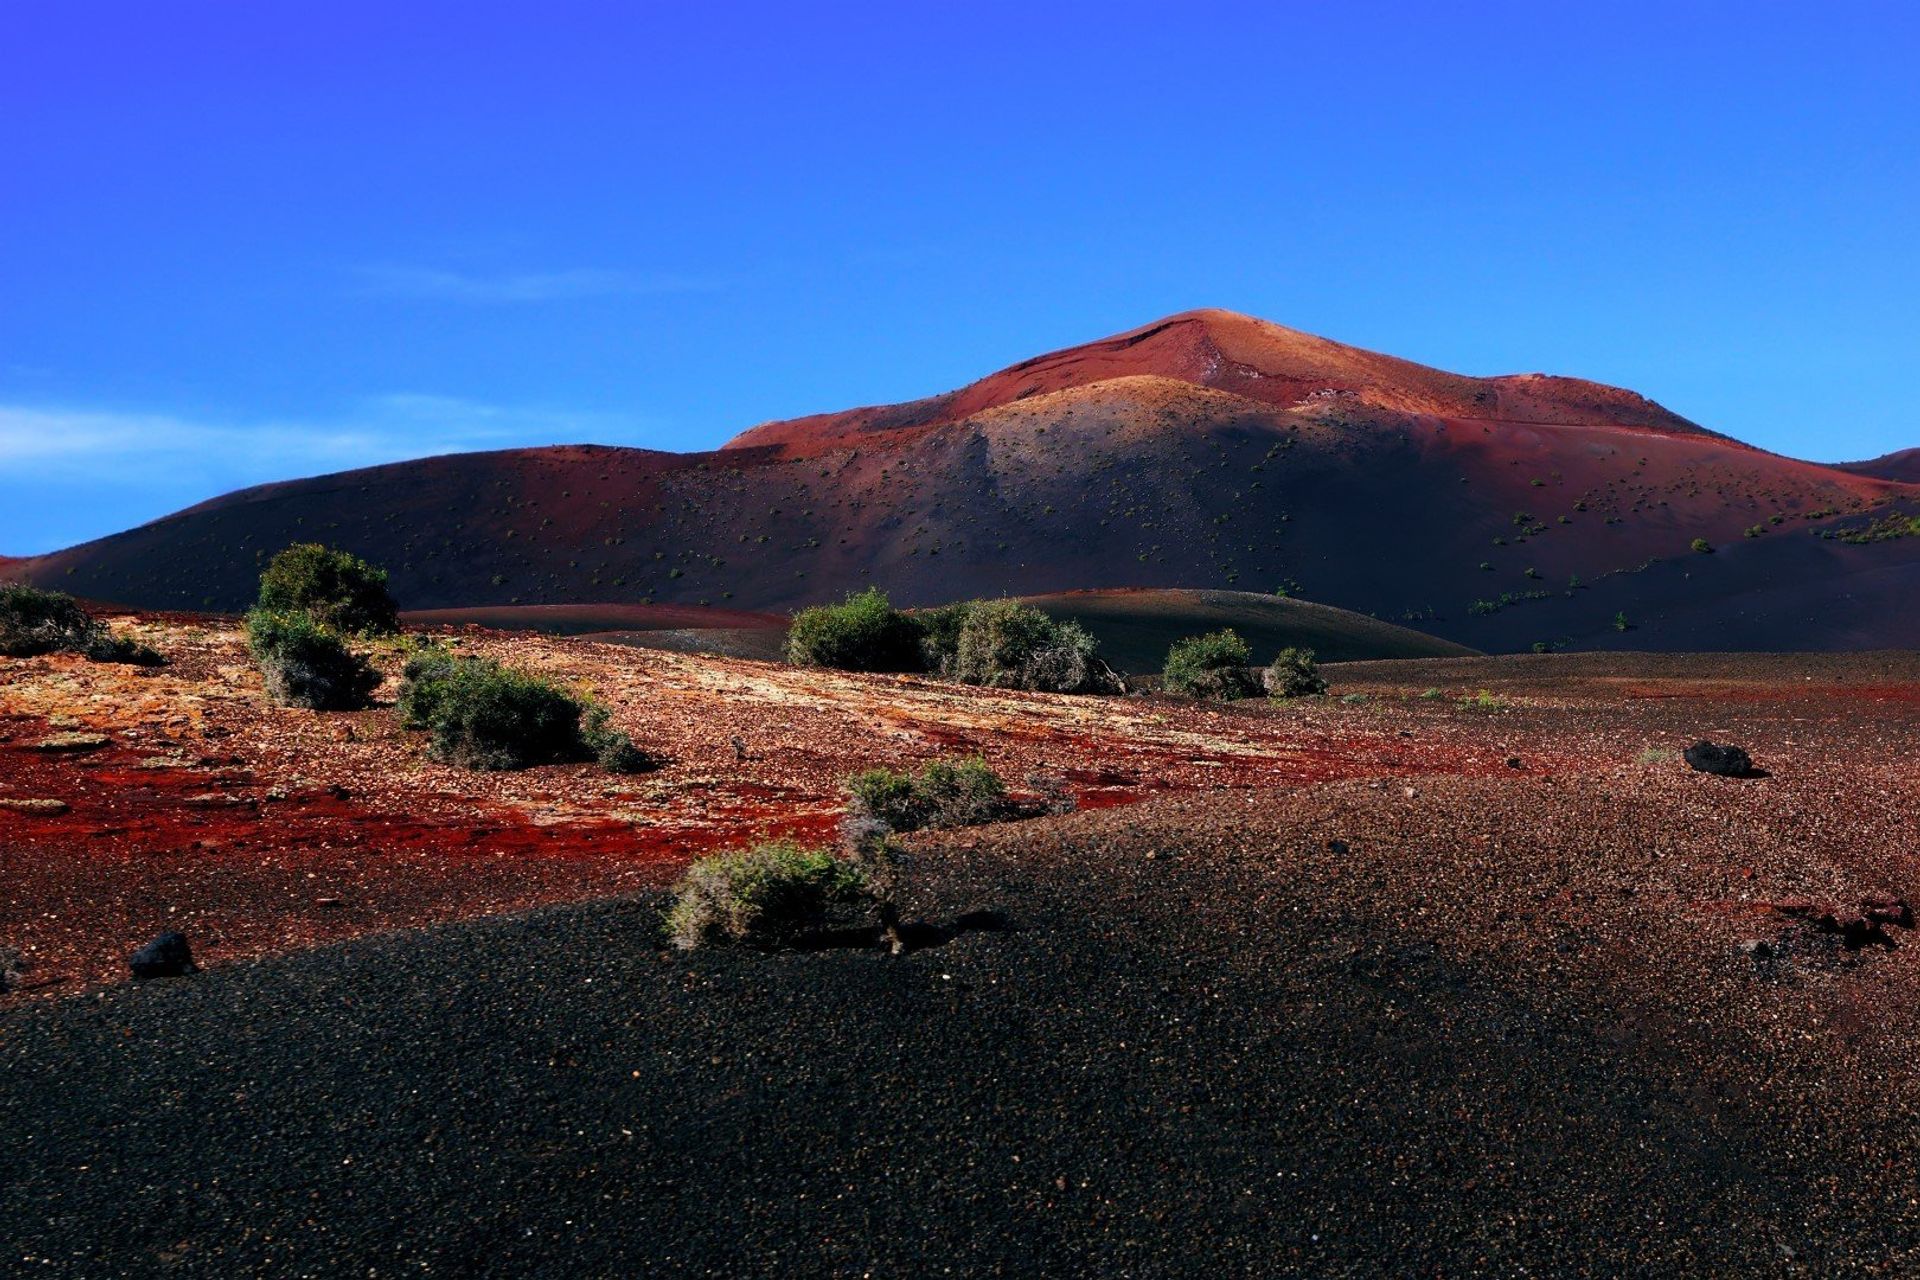 The striking volcanic landscape of Timanfaya National Park with its stunning red and black rocks, 20 minutes away from Puerto del Carmen